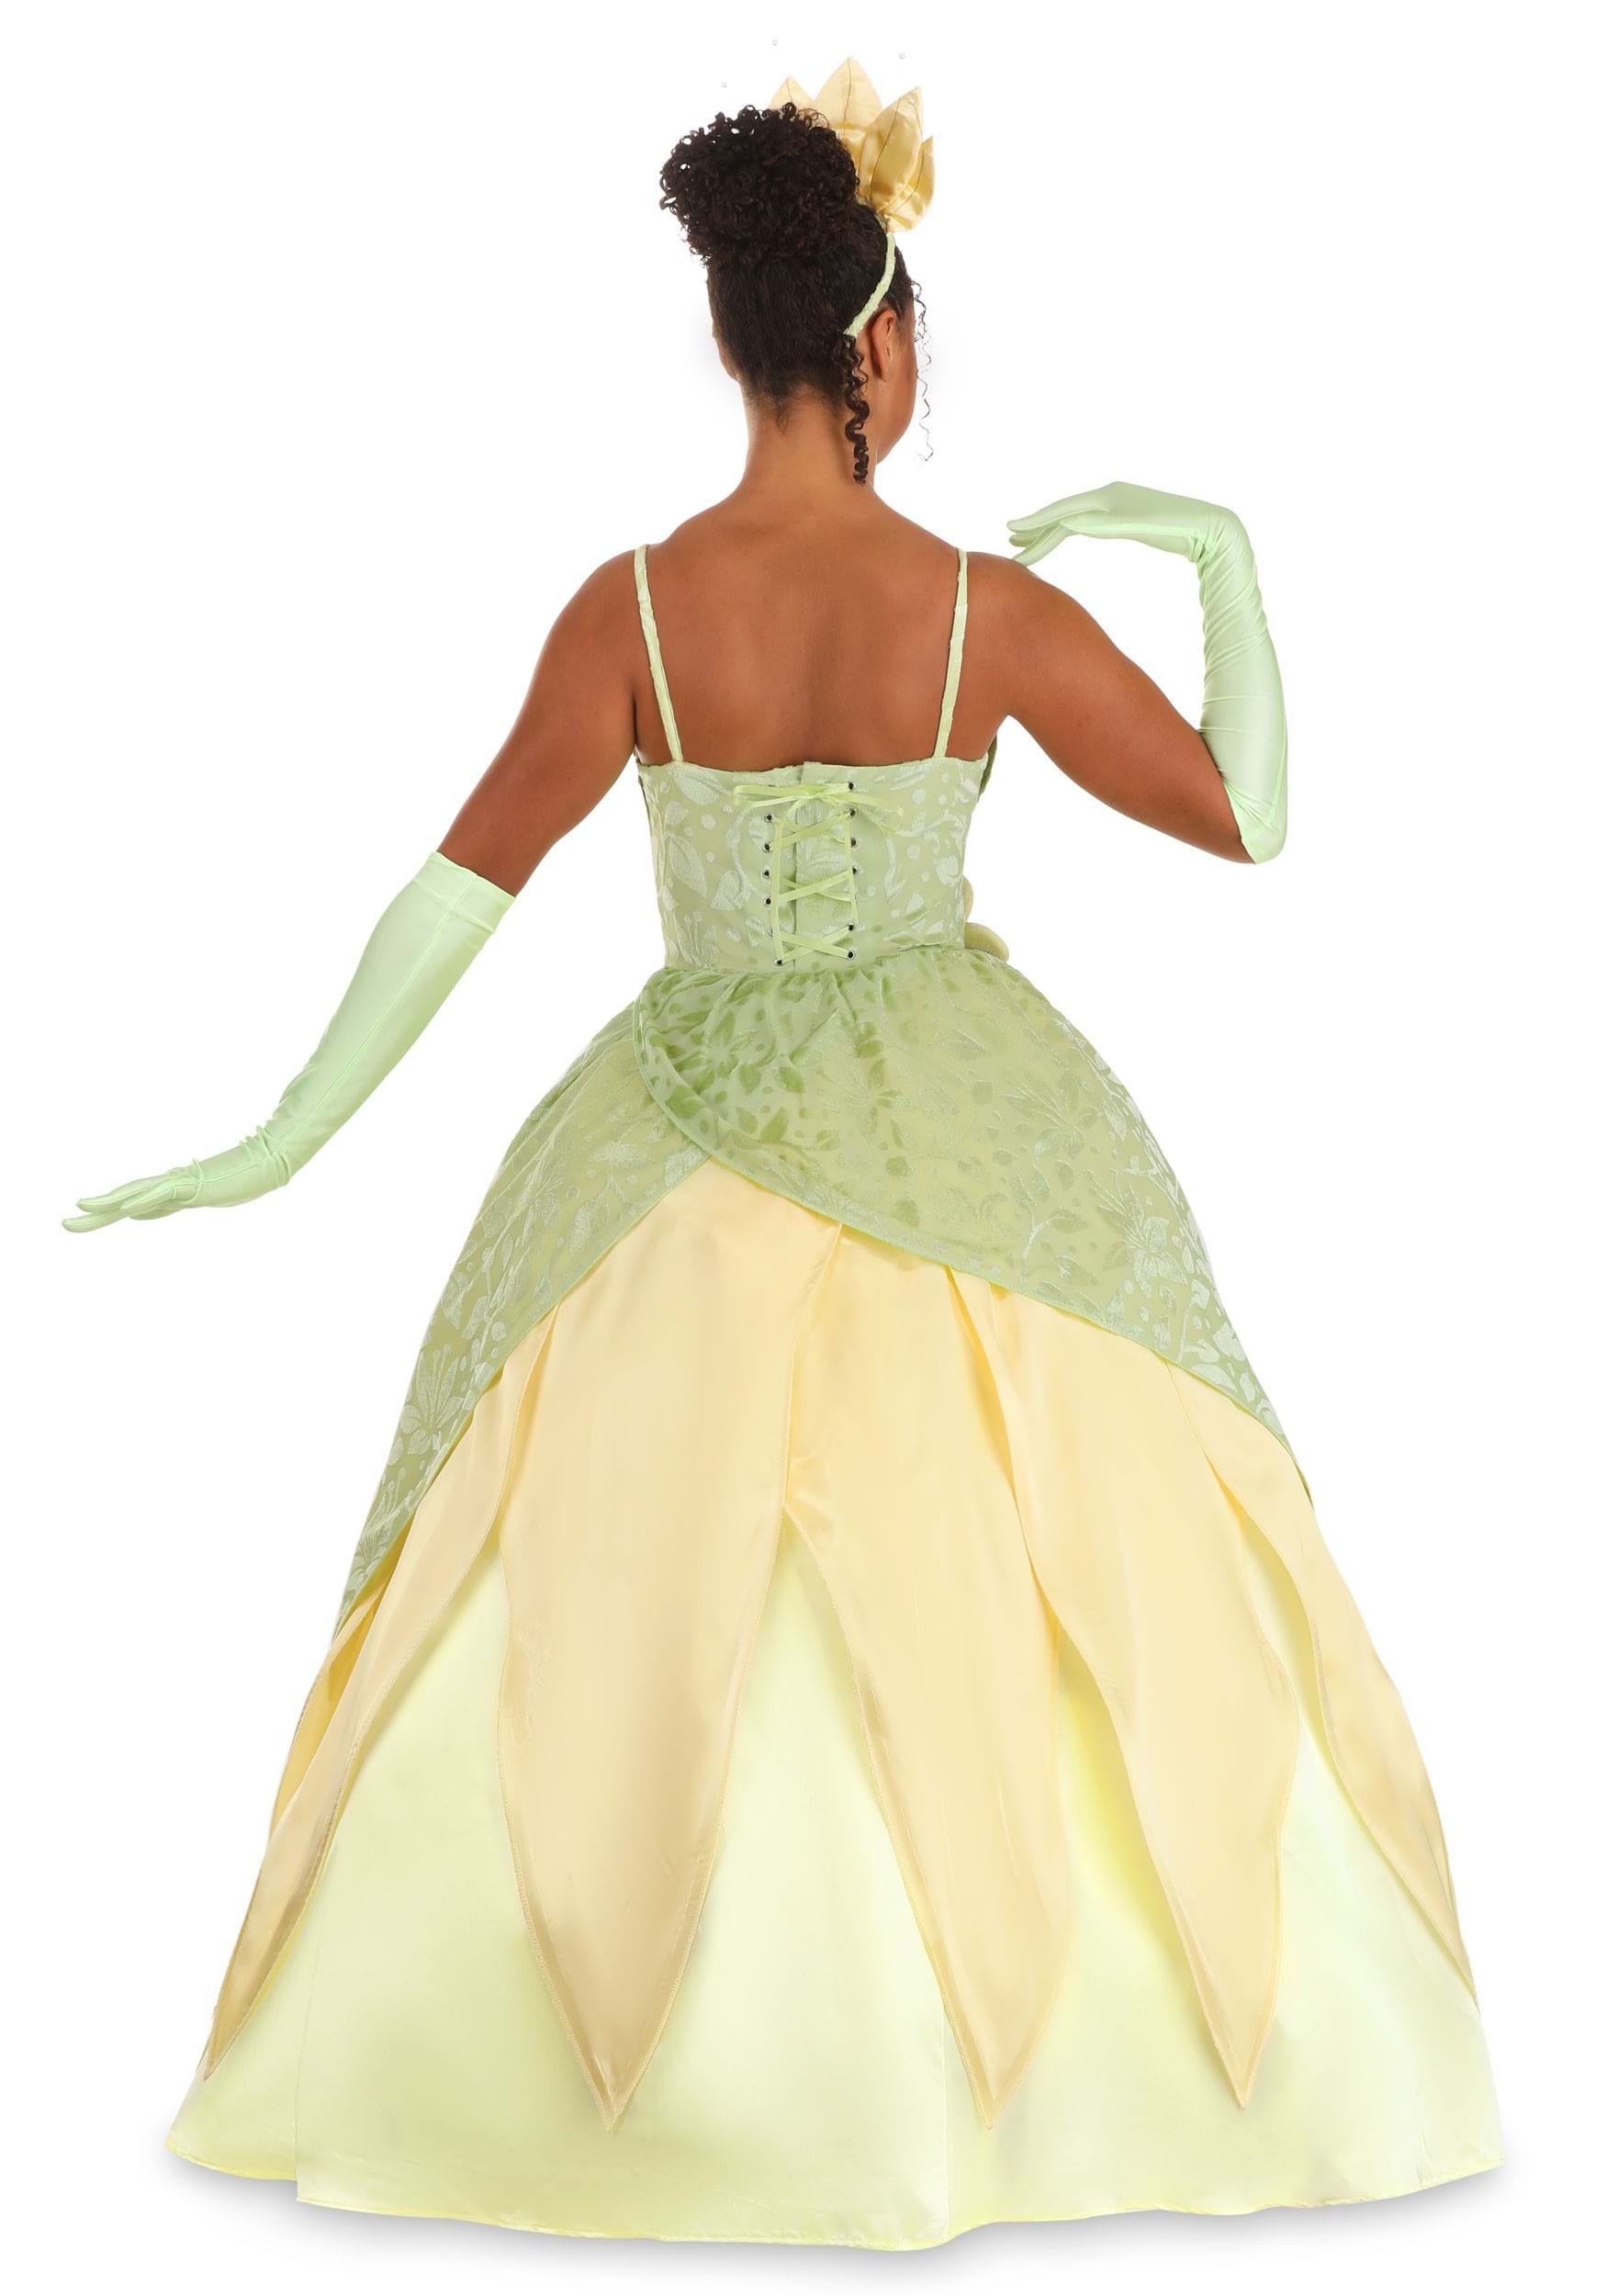 My Halloween costume a few years ago. I loved being Princess Tiana. I posed  for pics all day long at work …